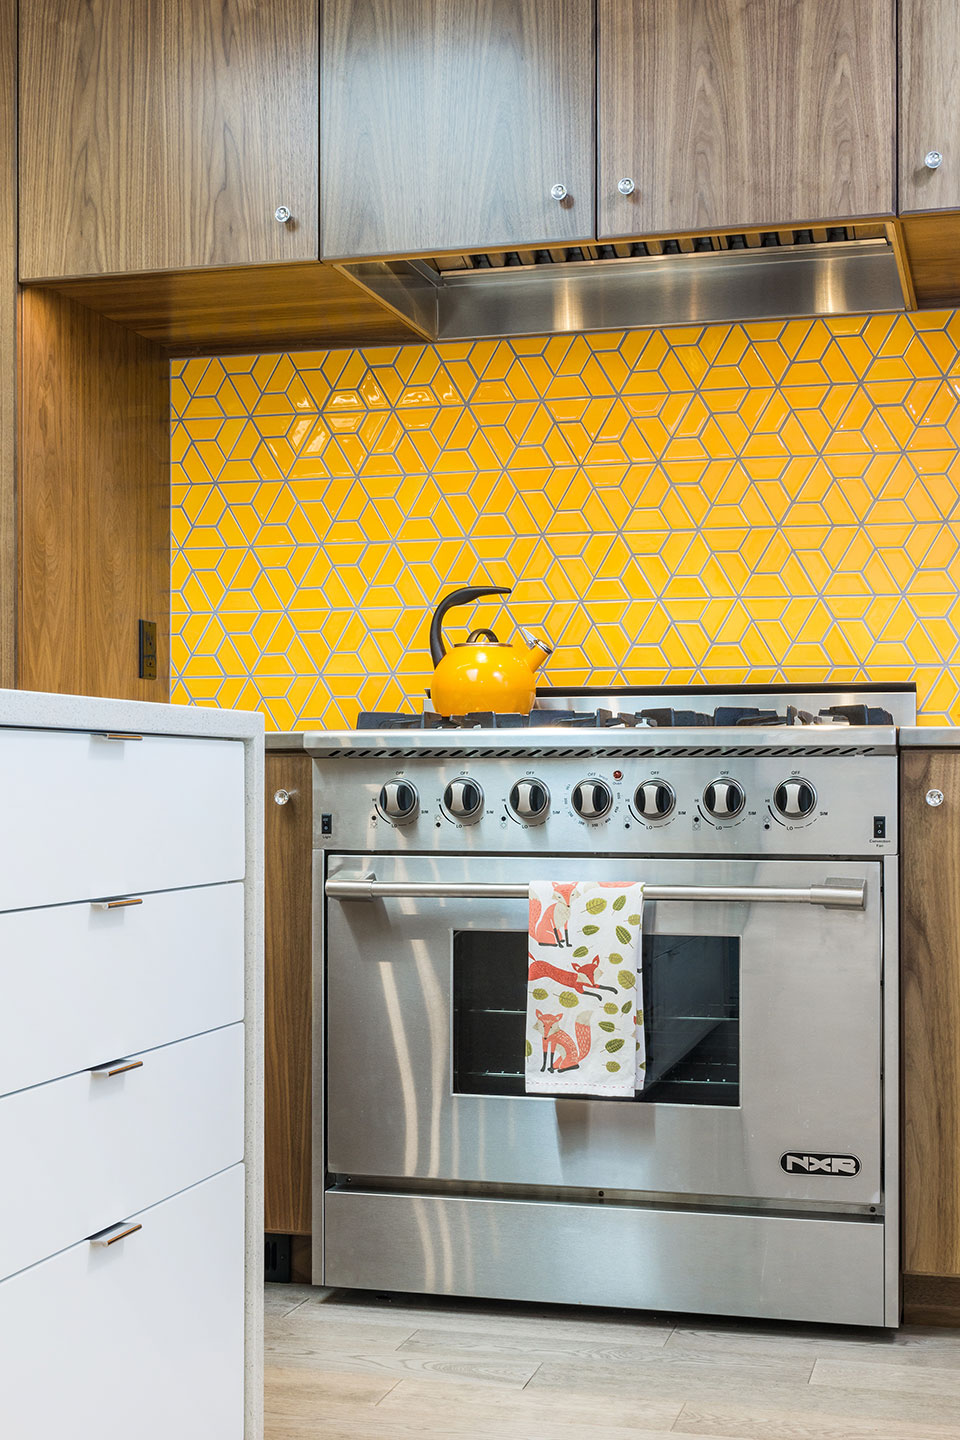 An orange-colored backsplash made of ceramic tile sits behind the stainless steel gas range at the Hawkridge Modern. The cabinetry is plain-sliced walnut.